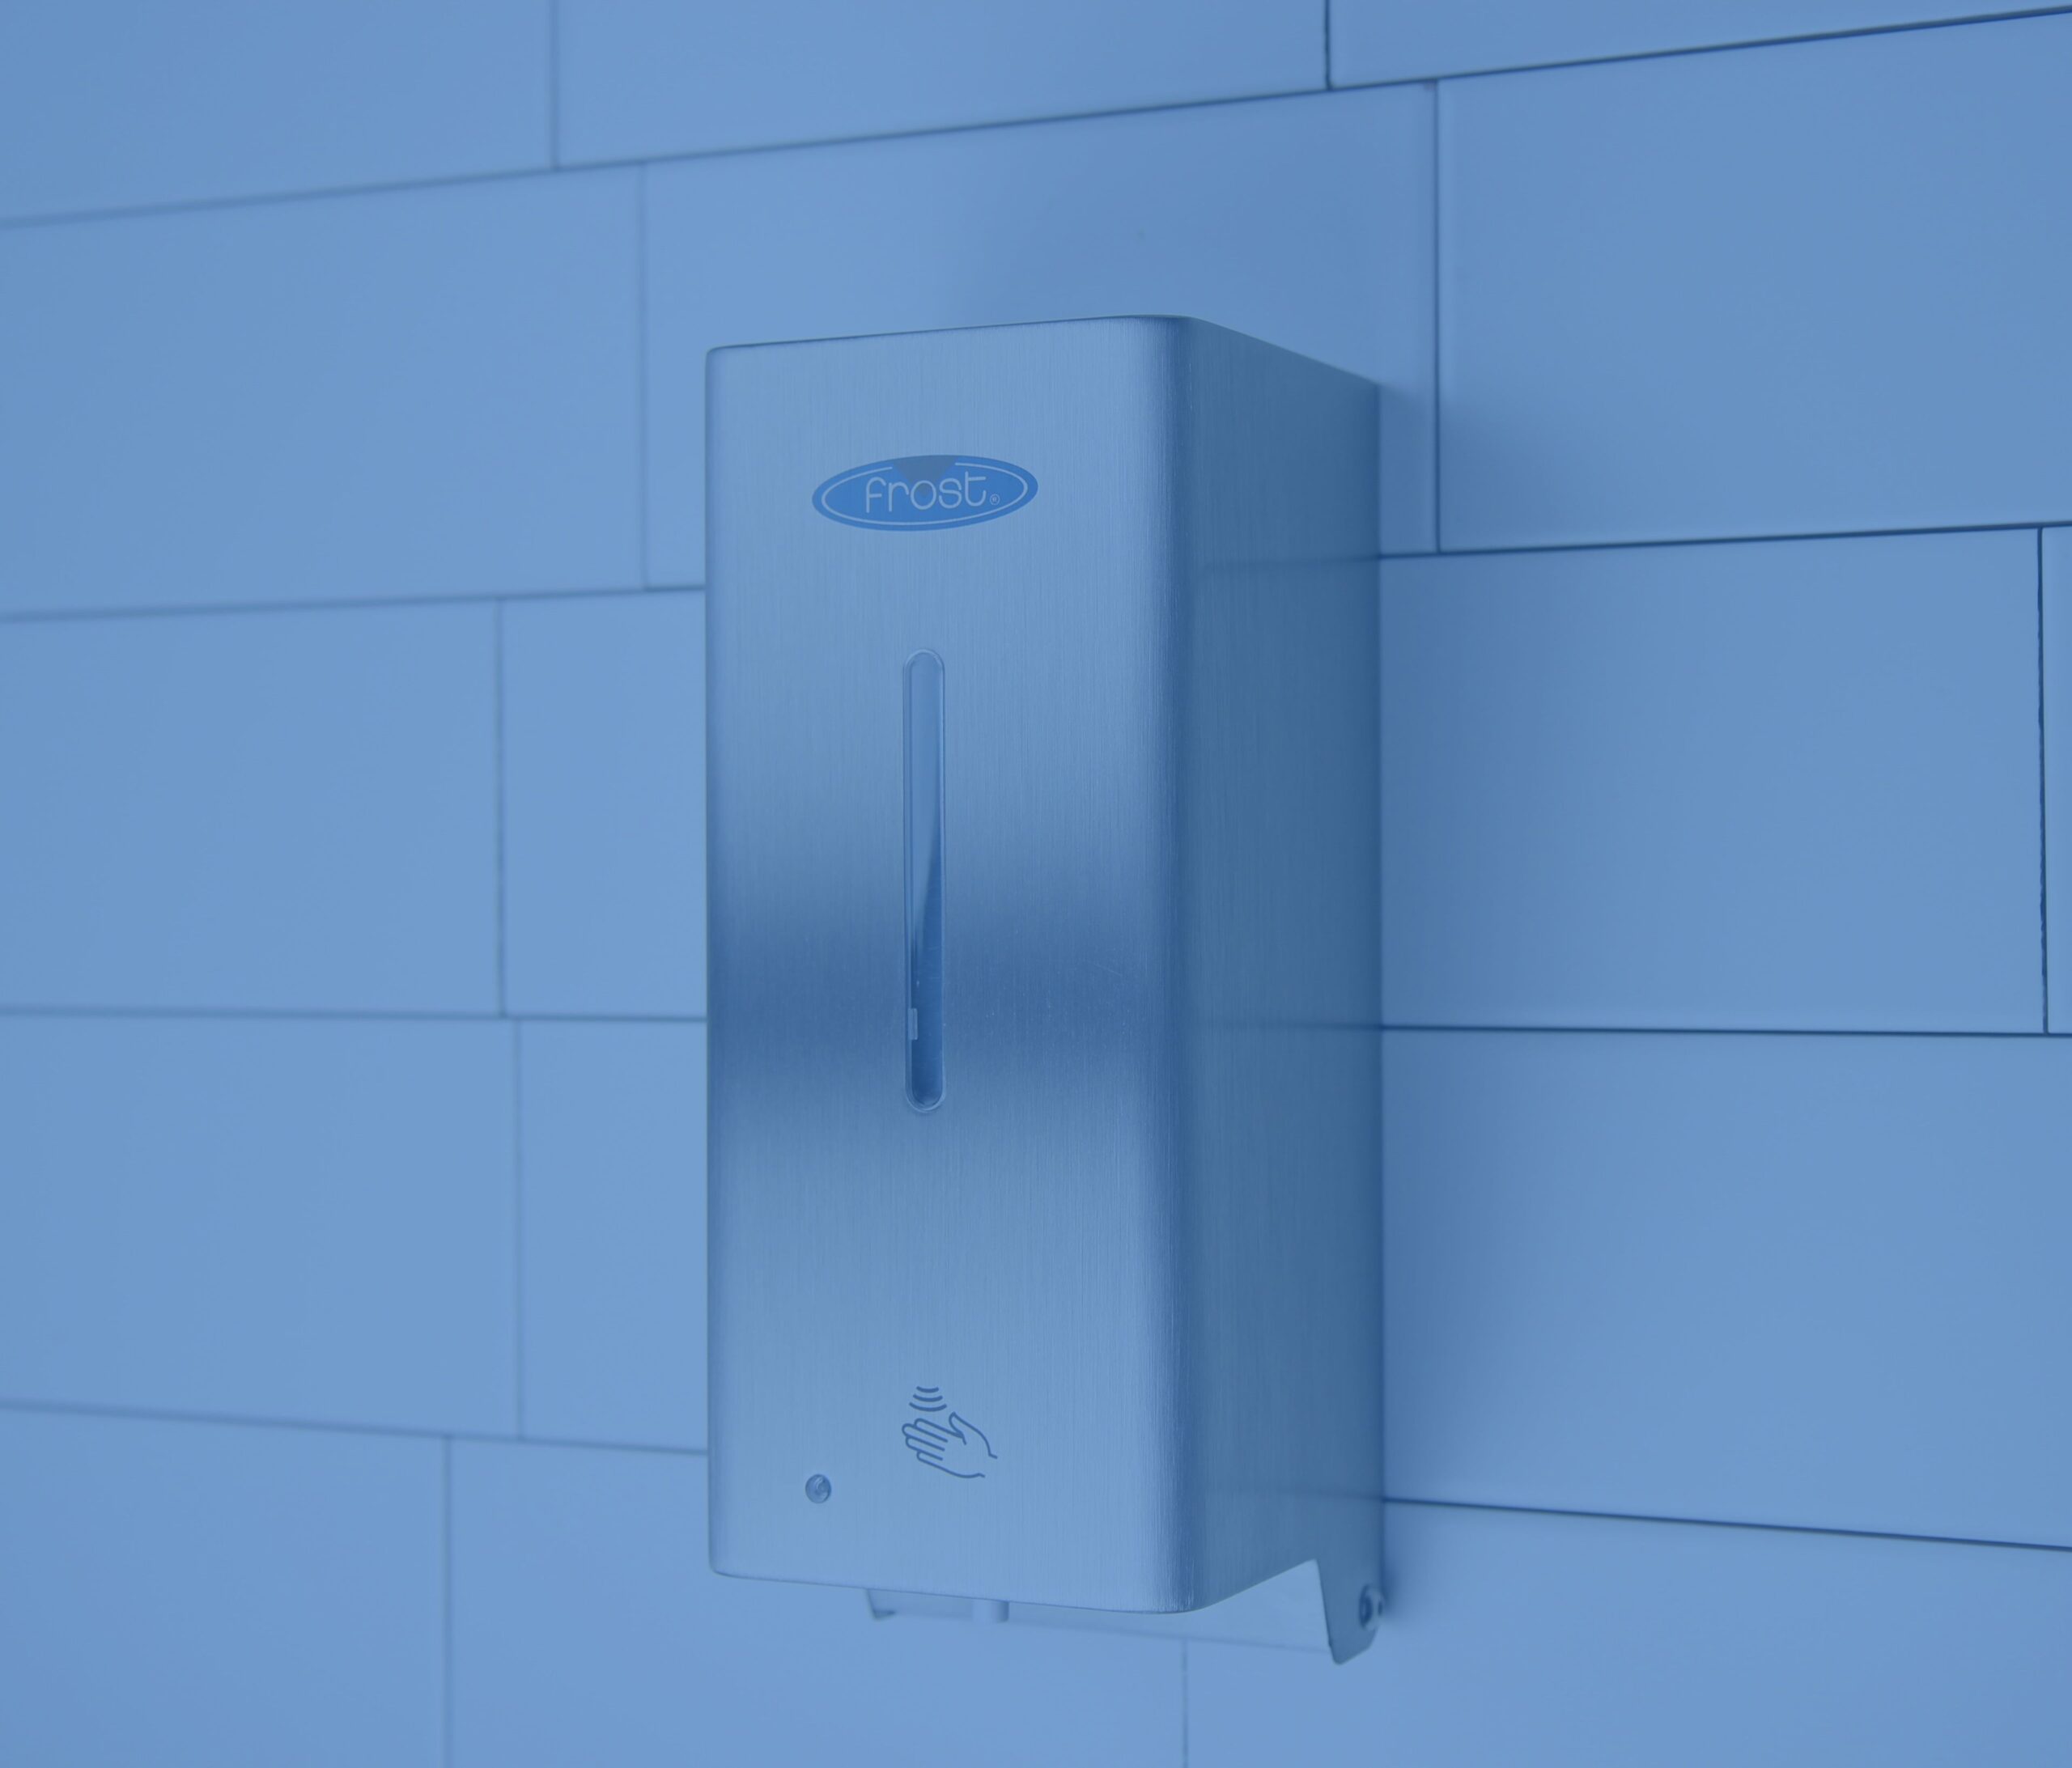 Showing Frost Code: 714-S wall mounted onto white tile